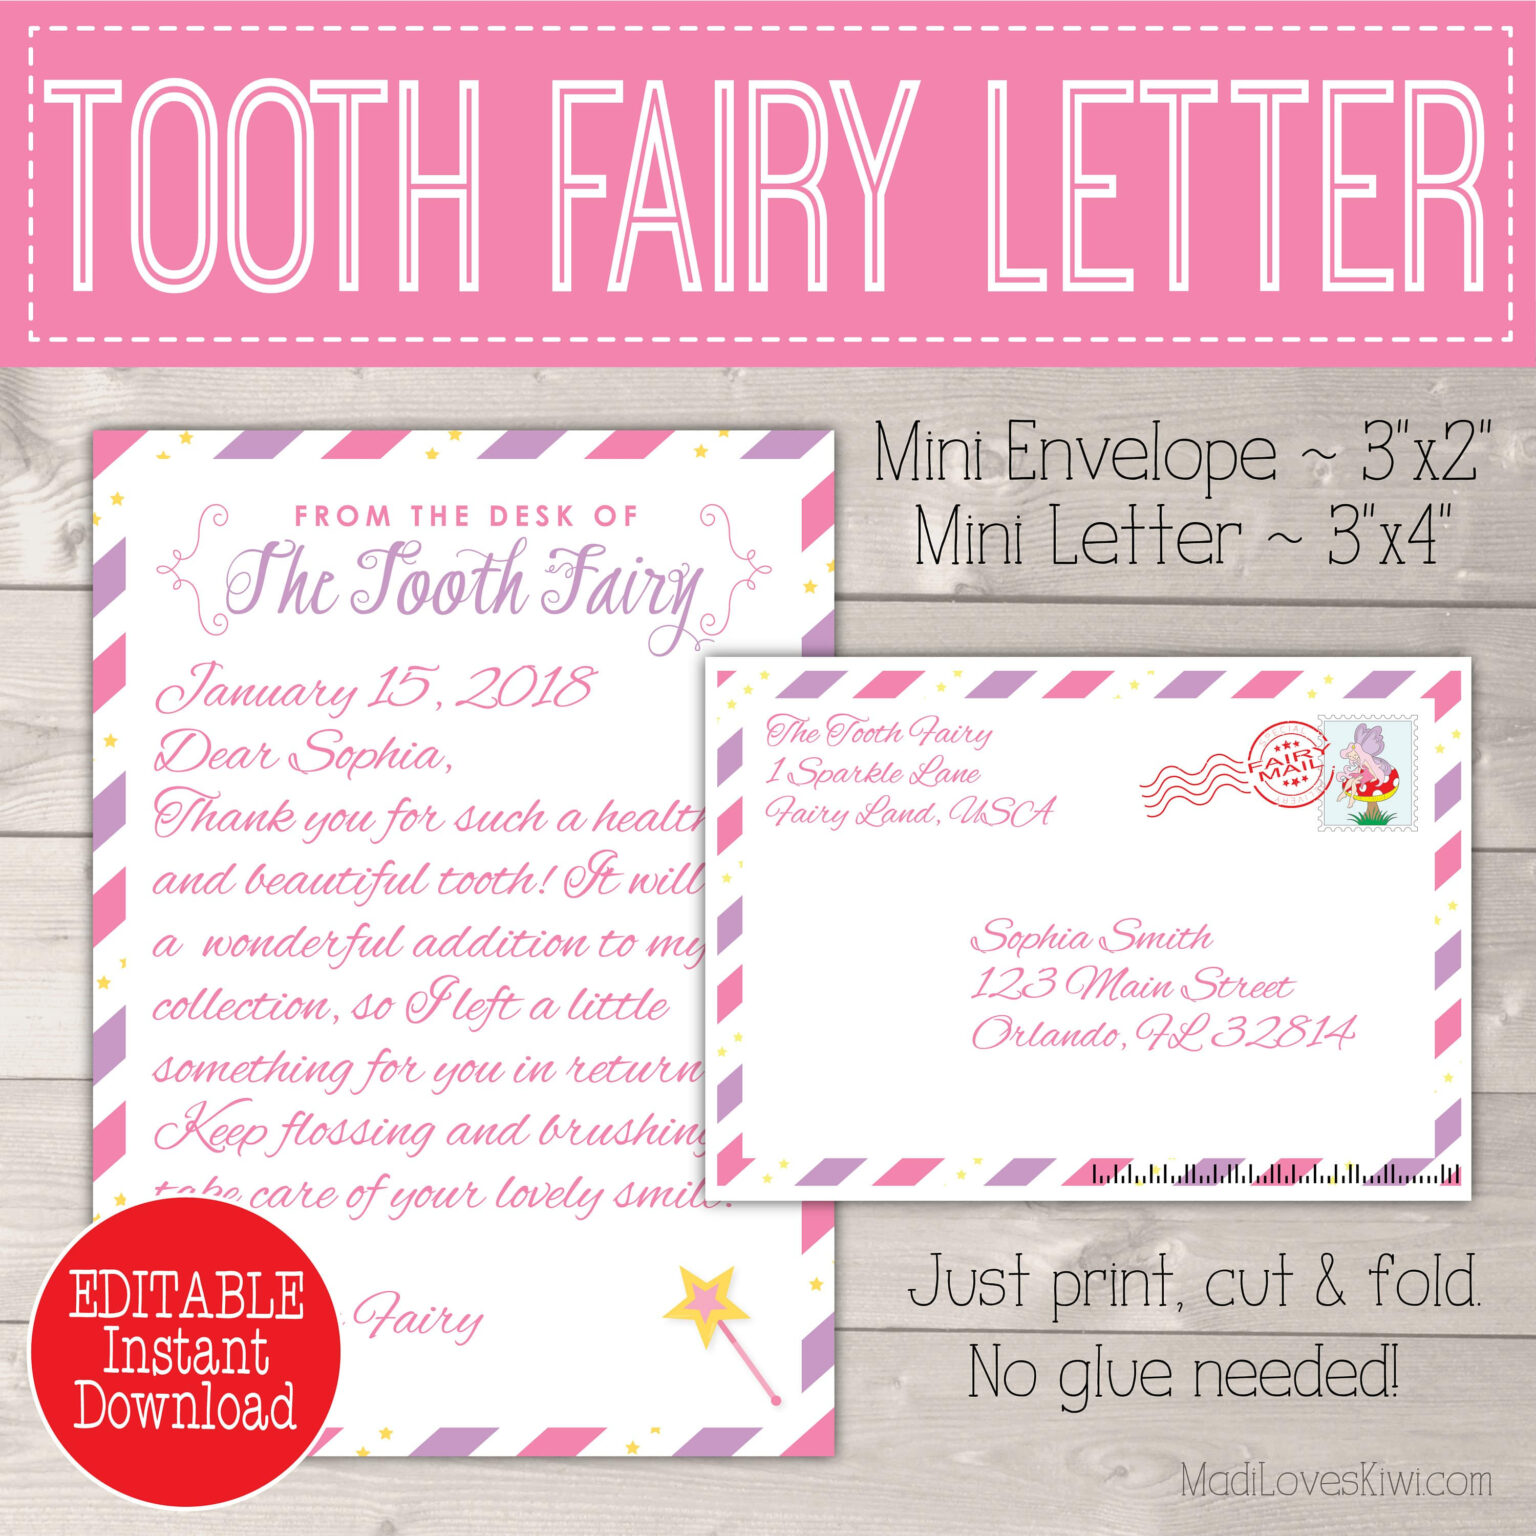 editable-tooth-fairy-letter-with-envelope-printable-pink-intended-for